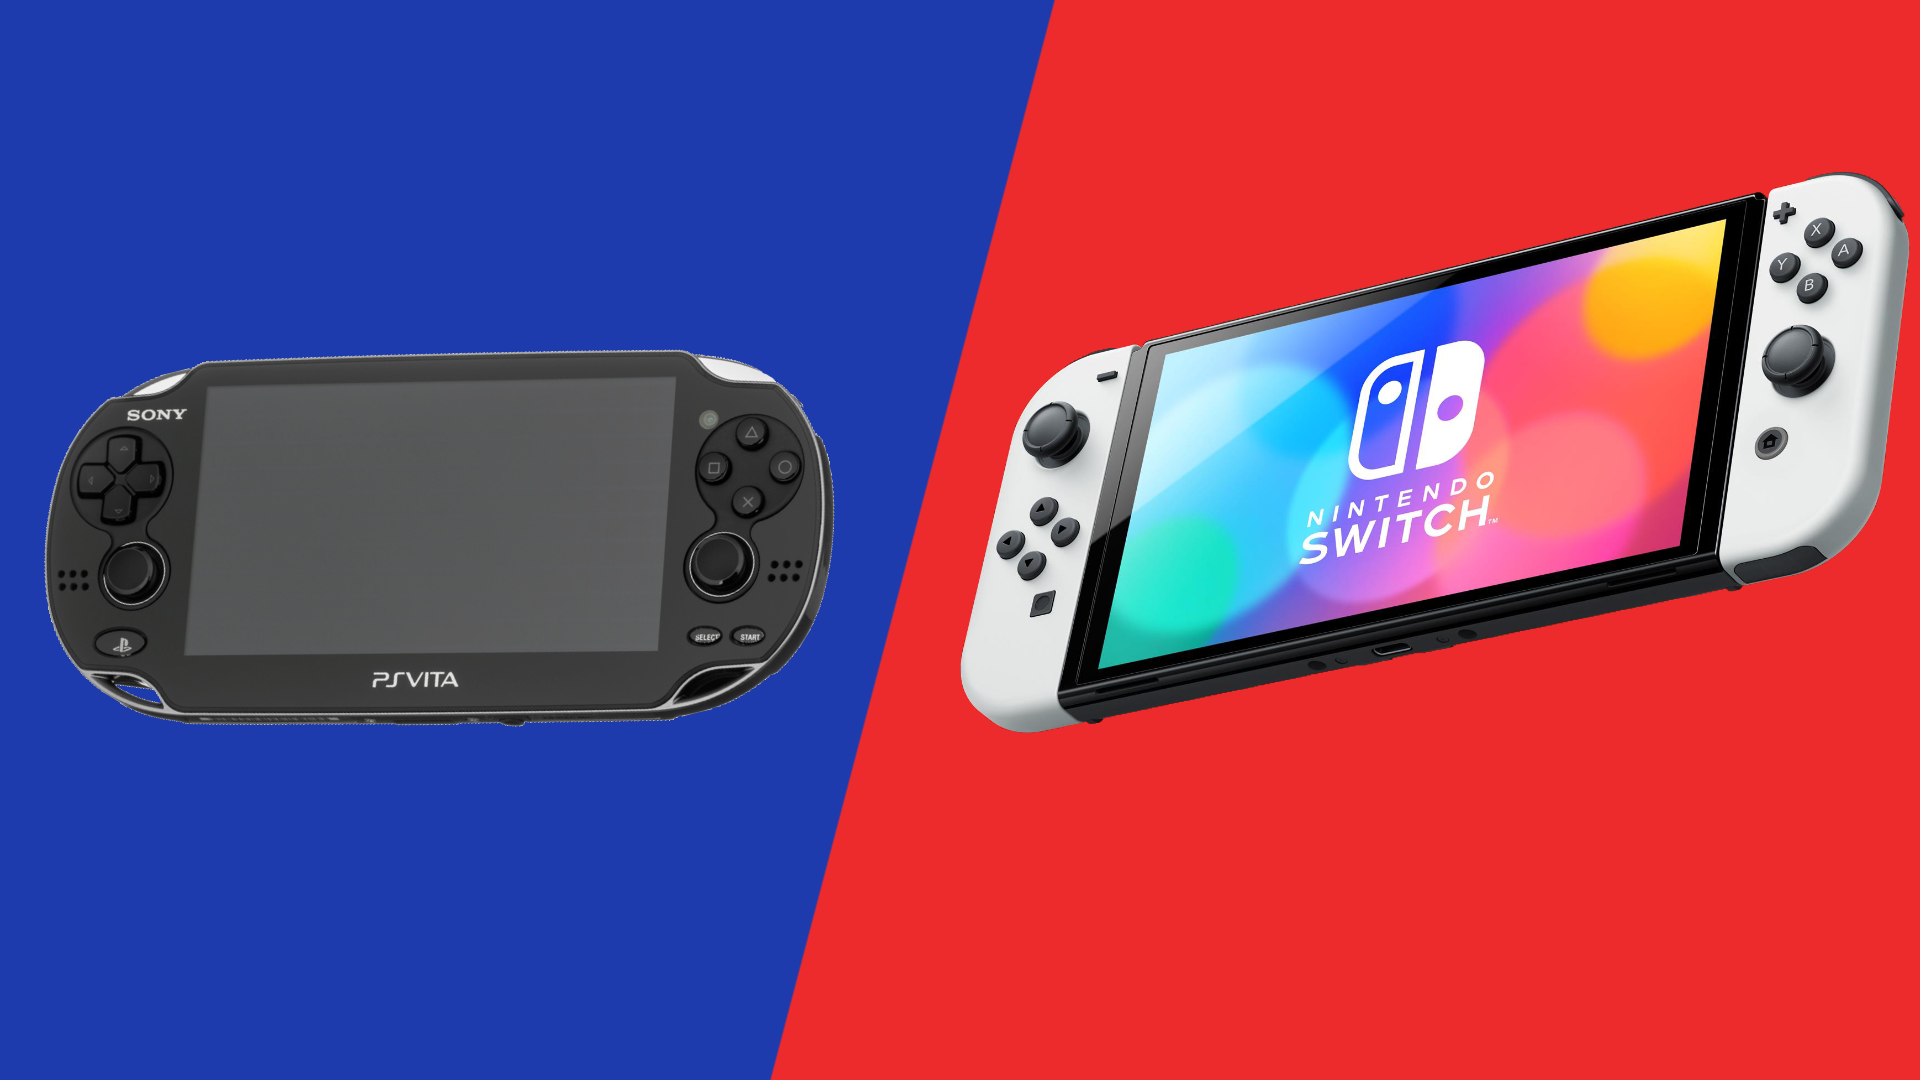 Accepteret Kommunist Interconnect The Switch OLED proves the PS Vita was ahead of the curve | TechRadar